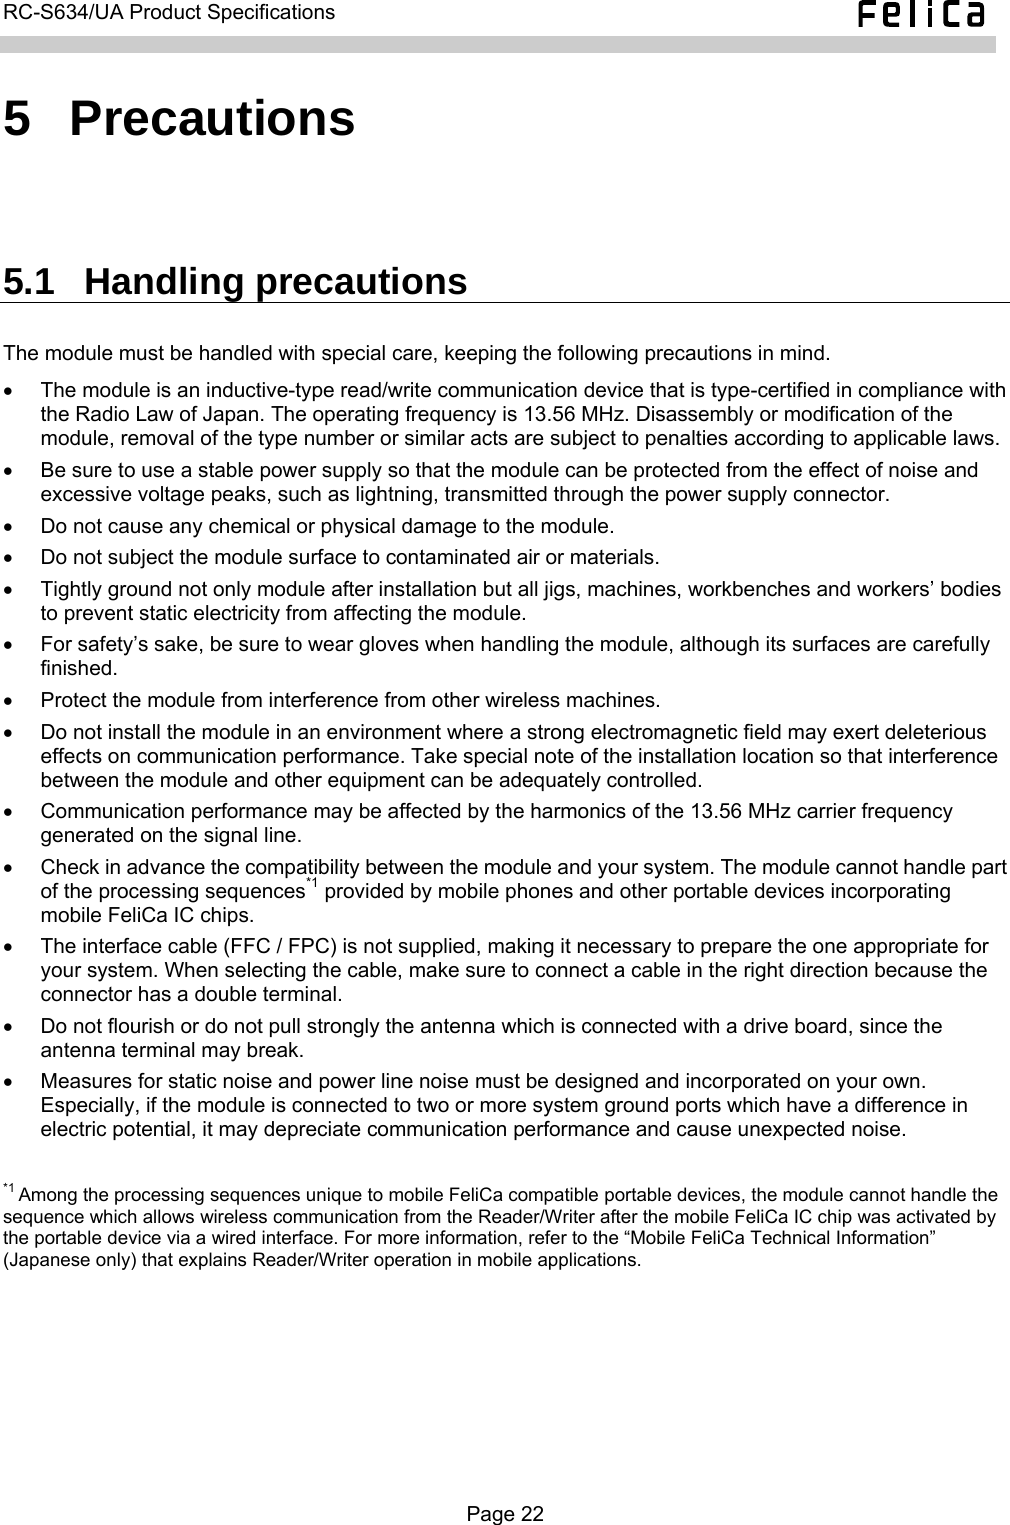   RC-S634/UA Product Specifications  5  Precautions 5.1  Handling precautions The module must be handled with special care, keeping the following precautions in mind. •  The module is an inductive-type read/write communication device that is type-certified in compliance with the Radio Law of Japan. The operating frequency is 13.56 MHz. Disassembly or modification of the module, removal of the type number or similar acts are subject to penalties according to applicable laws. •  Be sure to use a stable power supply so that the module can be protected from the effect of noise and excessive voltage peaks, such as lightning, transmitted through the power supply connector. •  Do not cause any chemical or physical damage to the module. •  Do not subject the module surface to contaminated air or materials. •  Tightly ground not only module after installation but all jigs, machines, workbenches and workers’ bodies to prevent static electricity from affecting the module. •  For safety’s sake, be sure to wear gloves when handling the module, although its surfaces are carefully finished. •  Protect the module from interference from other wireless machines. •  Do not install the module in an environment where a strong electromagnetic field may exert deleterious effects on communication performance. Take special note of the installation location so that interference between the module and other equipment can be adequately controlled. •  Communication performance may be affected by the harmonics of the 13.56 MHz carrier frequency generated on the signal line. •  Check in advance the compatibility between the module and your system. The module cannot handle part of the processing sequences*1 provided by mobile phones and other portable devices incorporating mobile FeliCa IC chips. •  The interface cable (FFC / FPC) is not supplied, making it necessary to prepare the one appropriate for your system. When selecting the cable, make sure to connect a cable in the right direction because the connector has a double terminal. •  Do not flourish or do not pull strongly the antenna which is connected with a drive board, since the antenna terminal may break. •  Measures for static noise and power line noise must be designed and incorporated on your own. Especially, if the module is connected to two or more system ground ports which have a difference in electric potential, it may depreciate communication performance and cause unexpected noise.  *1 Among the processing sequences unique to mobile FeliCa compatible portable devices, the module cannot handle the sequence which allows wireless communication from the Reader/Writer after the mobile FeliCa IC chip was activated by the portable device via a wired interface. For more information, refer to the “Mobile FeliCa Technical Information” (Japanese only) that explains Reader/Writer operation in mobile applications.  Page 22  